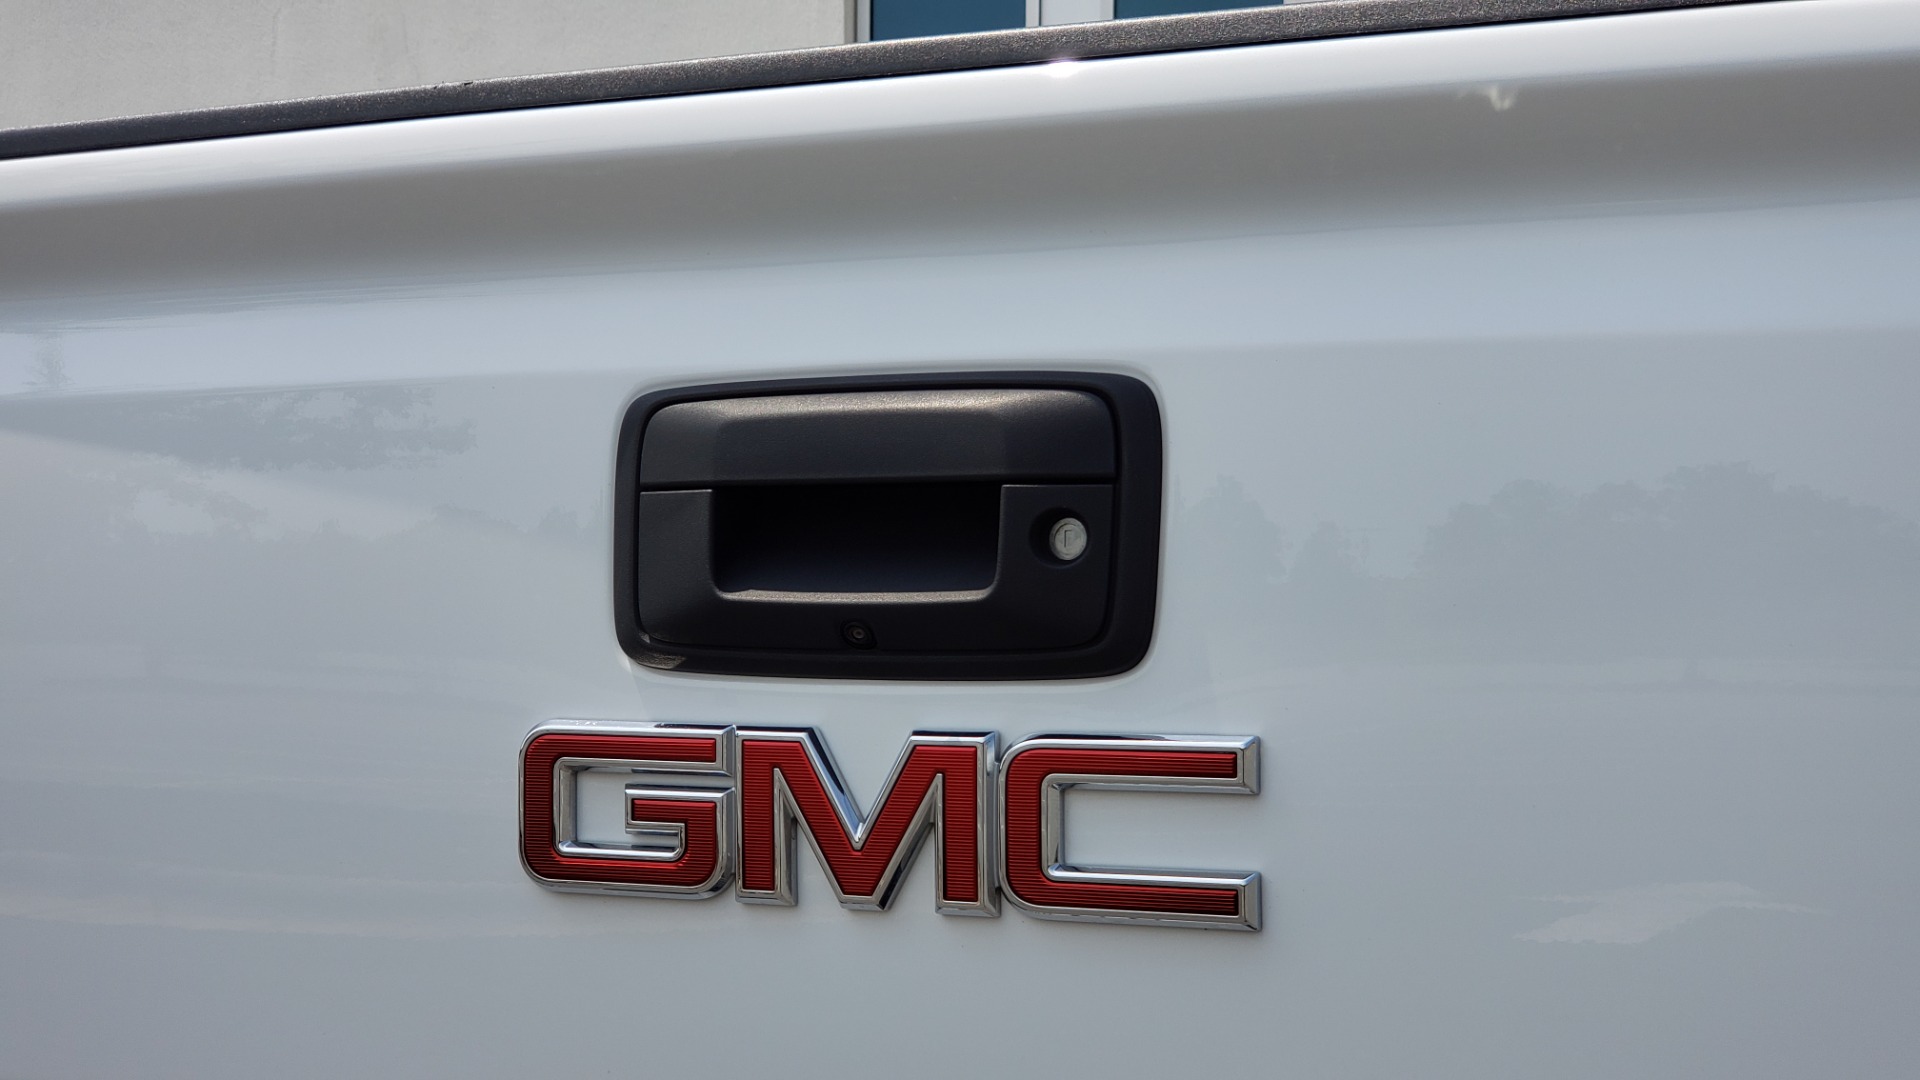 Used 2018 GMC SIERRA 1500 4WD DOUBLECAB / 143.5IN / 5.3L V8 / 6-SPD AUTO / REARVIEW for sale Sold at Formula Imports in Charlotte NC 28227 30